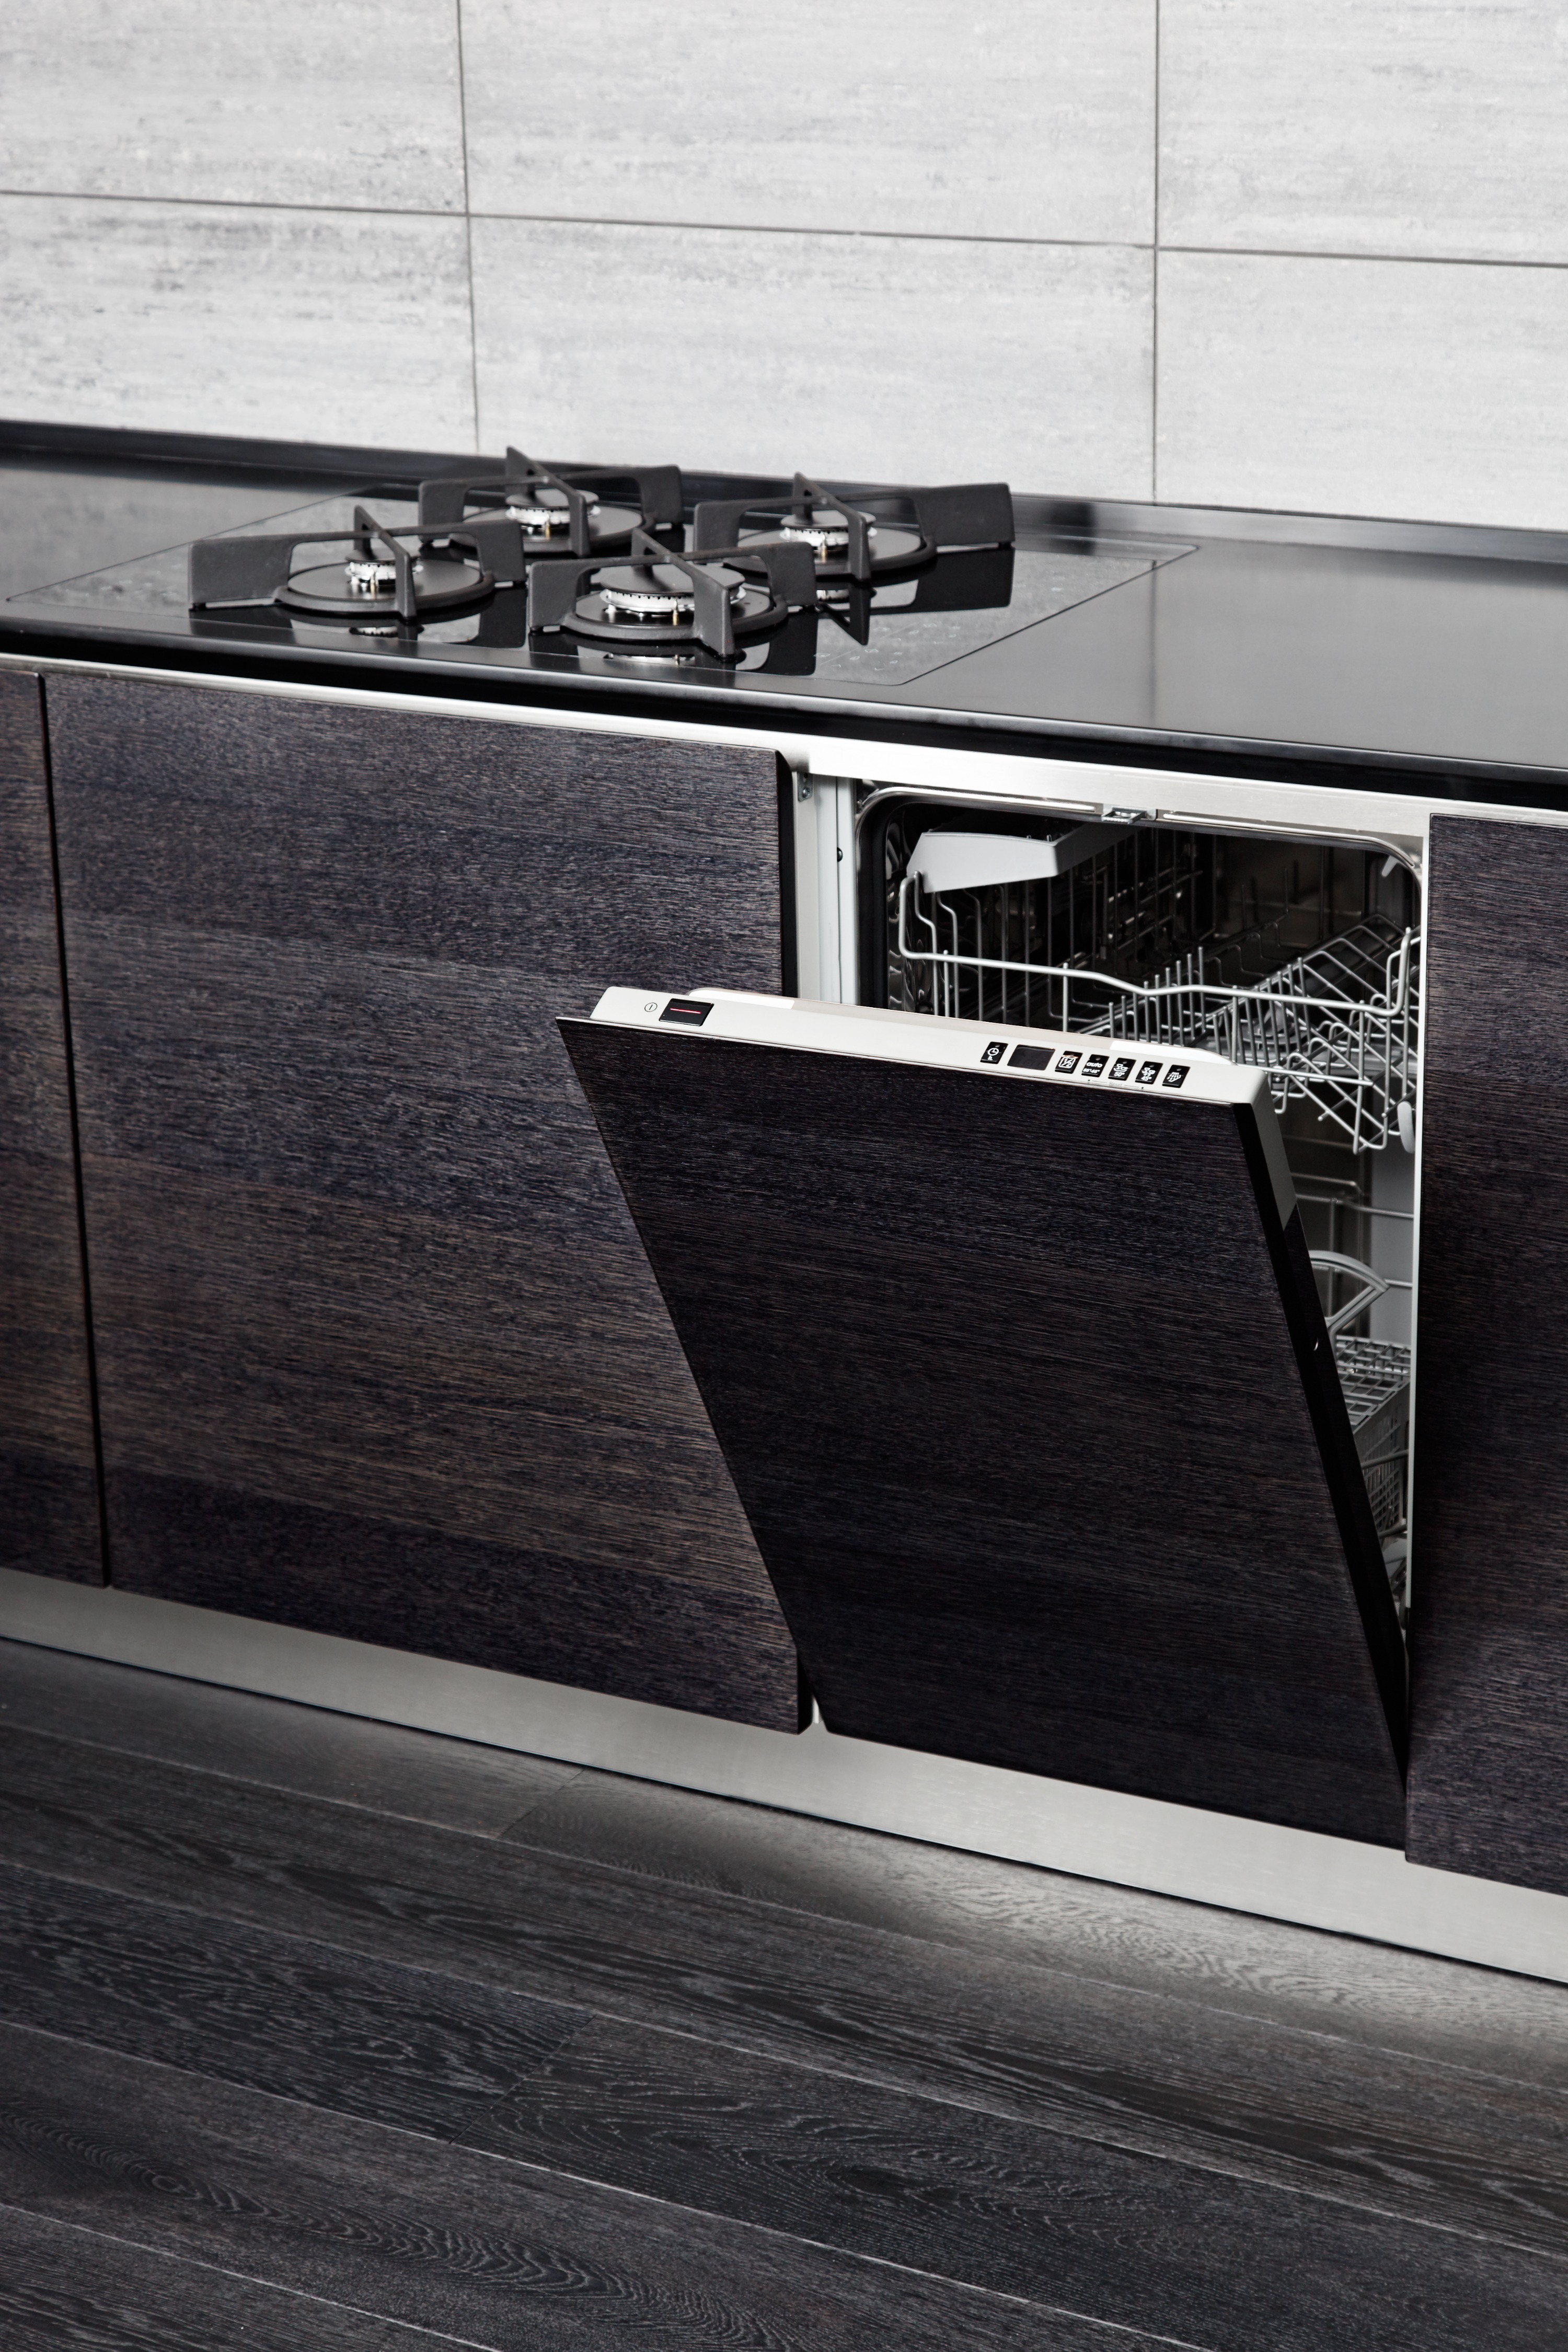 A panel ready dishwasher in a slab style kitchen.